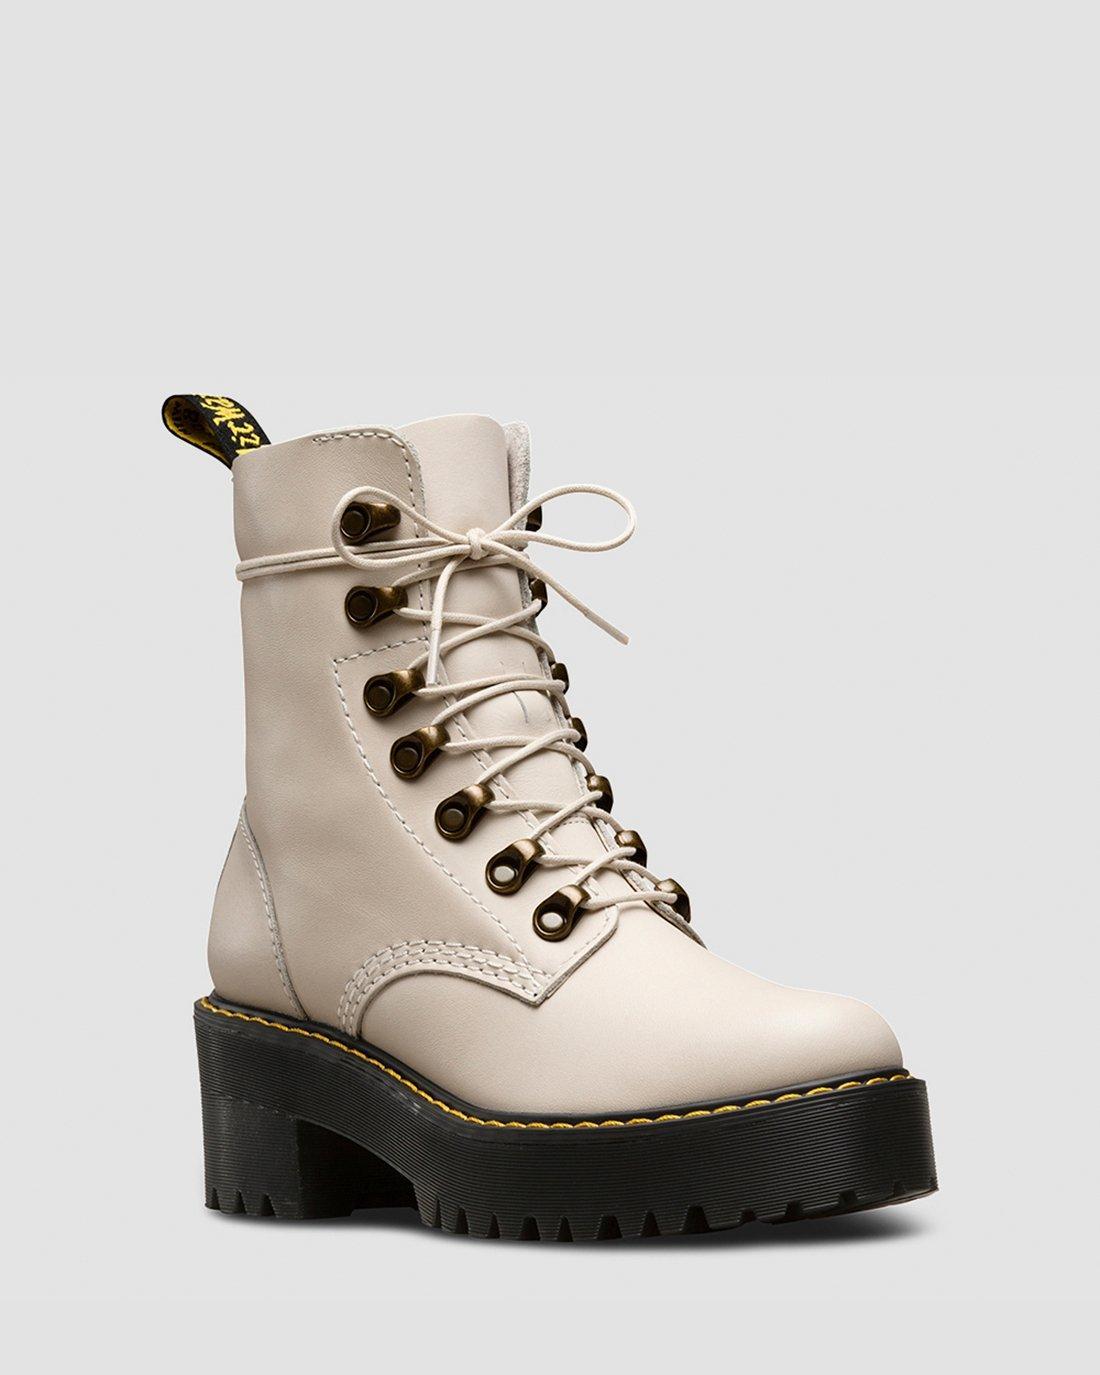 Dr. Martens Leona Women's Temperley Leather Heeled Boots in Natural | Lyst